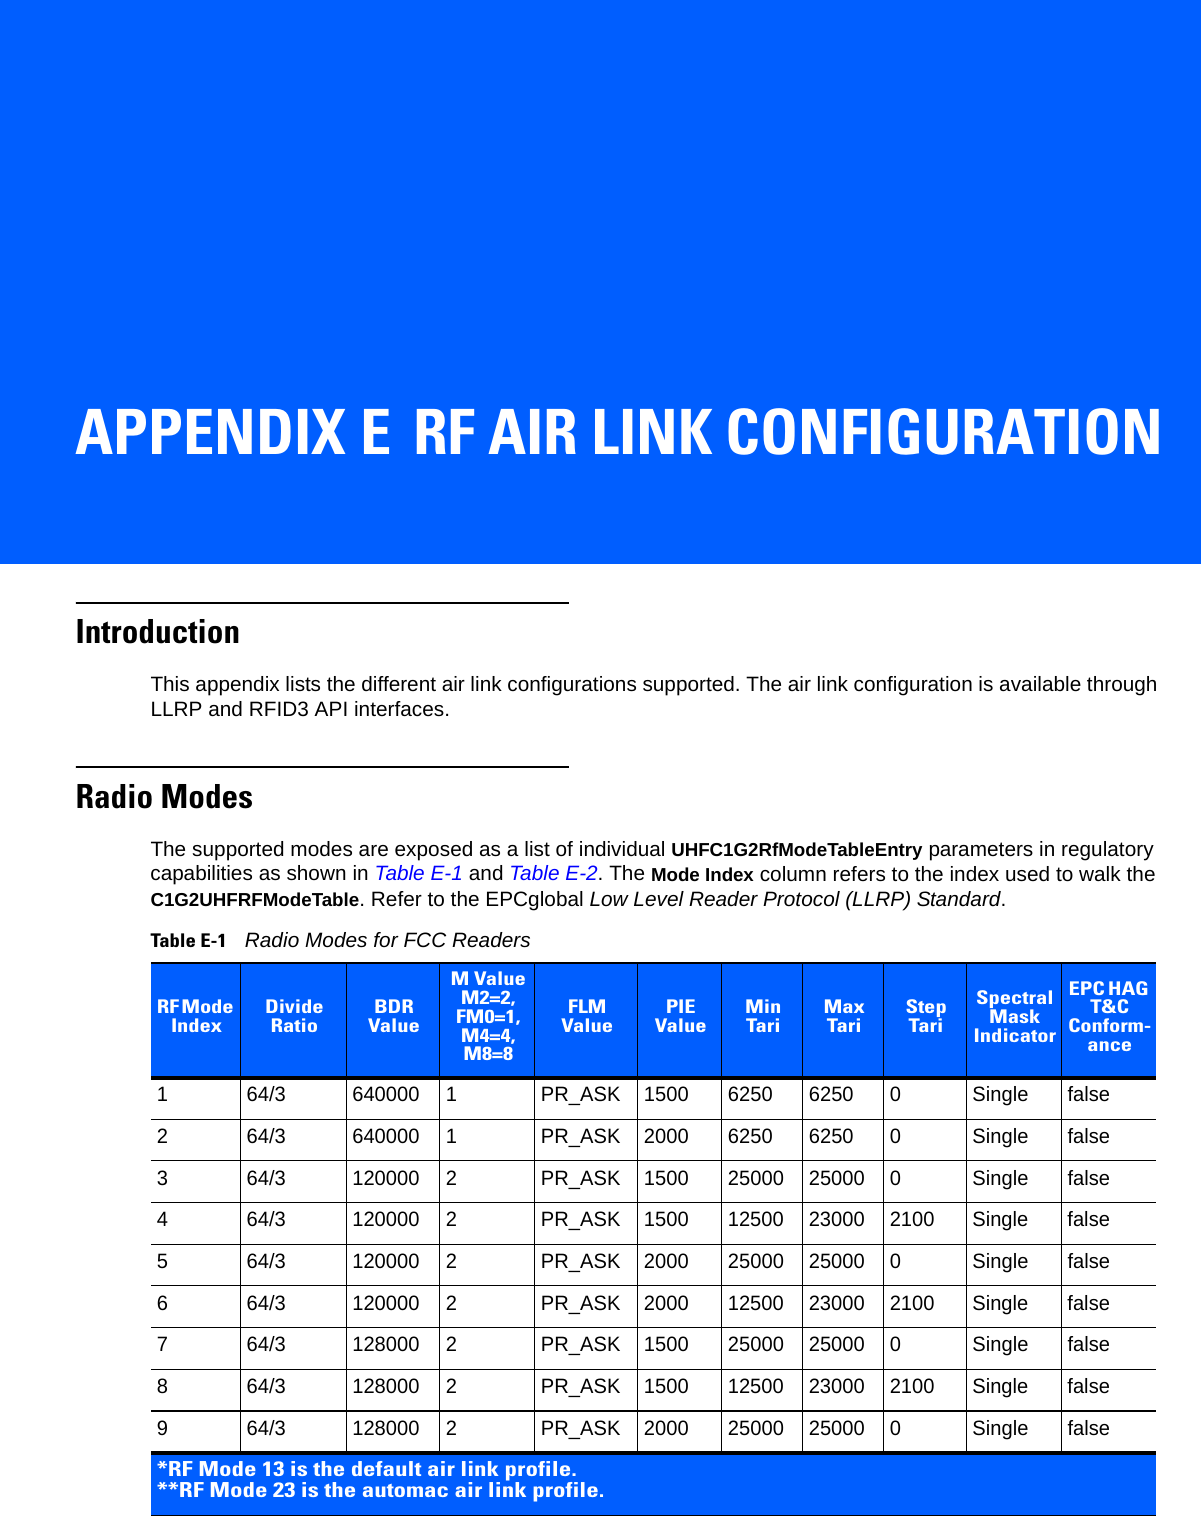 APPENDIX E RF AIR LINK CONFIGURATIONIntroductionThis appendix lists the different air link configurations supported. The air link configuration is available through LLRP and RFID3 API interfaces.Radio ModesThe supported modes are exposed as a list of individual UHFC1G2RfModeTableEntry parameters in regulatory capabilities as shown in Table E-1 and Table E-2. The Mode Index column refers to the index used to walk the C1G2UHFRFModeTable. Refer to the EPCglobal Low Level Reader Protocol (LLRP) Standard.Table E-1    Radio Modes for FCC ReadersRF Mode Index Divide RatioBDR ValueM Value M2=2,FM0=1, M4=4,M8=8FLM ValuePIE ValueMin TariMax TariStep TariSpectral Mask IndicatorEPC HAG T&amp;C Conform-ance1 64/3 640000 1 PR_ASK 1500 6250 6250 0 Single false2 64/3 640000 1 PR_ASK 2000 6250 6250 0 Single false3 64/3 120000 2 PR_ASK 1500 25000 25000 0 Single false4 64/3 120000 2 PR_ASK 1500 12500 23000 2100 Single false5 64/3 120000 2 PR_ASK 2000 25000 25000 0 Single false6 64/3 120000 2 PR_ASK 2000 12500 23000 2100 Single false7 64/3 128000 2 PR_ASK 1500 25000 25000 0 Single false8 64/3 128000 2 PR_ASK 1500 12500 23000 2100 Single false9 64/3 128000 2 PR_ASK 2000 25000 25000 0 Single false*RF Mode 13 is the default air link profile.**RF Mode 23 is the automac air link profile.